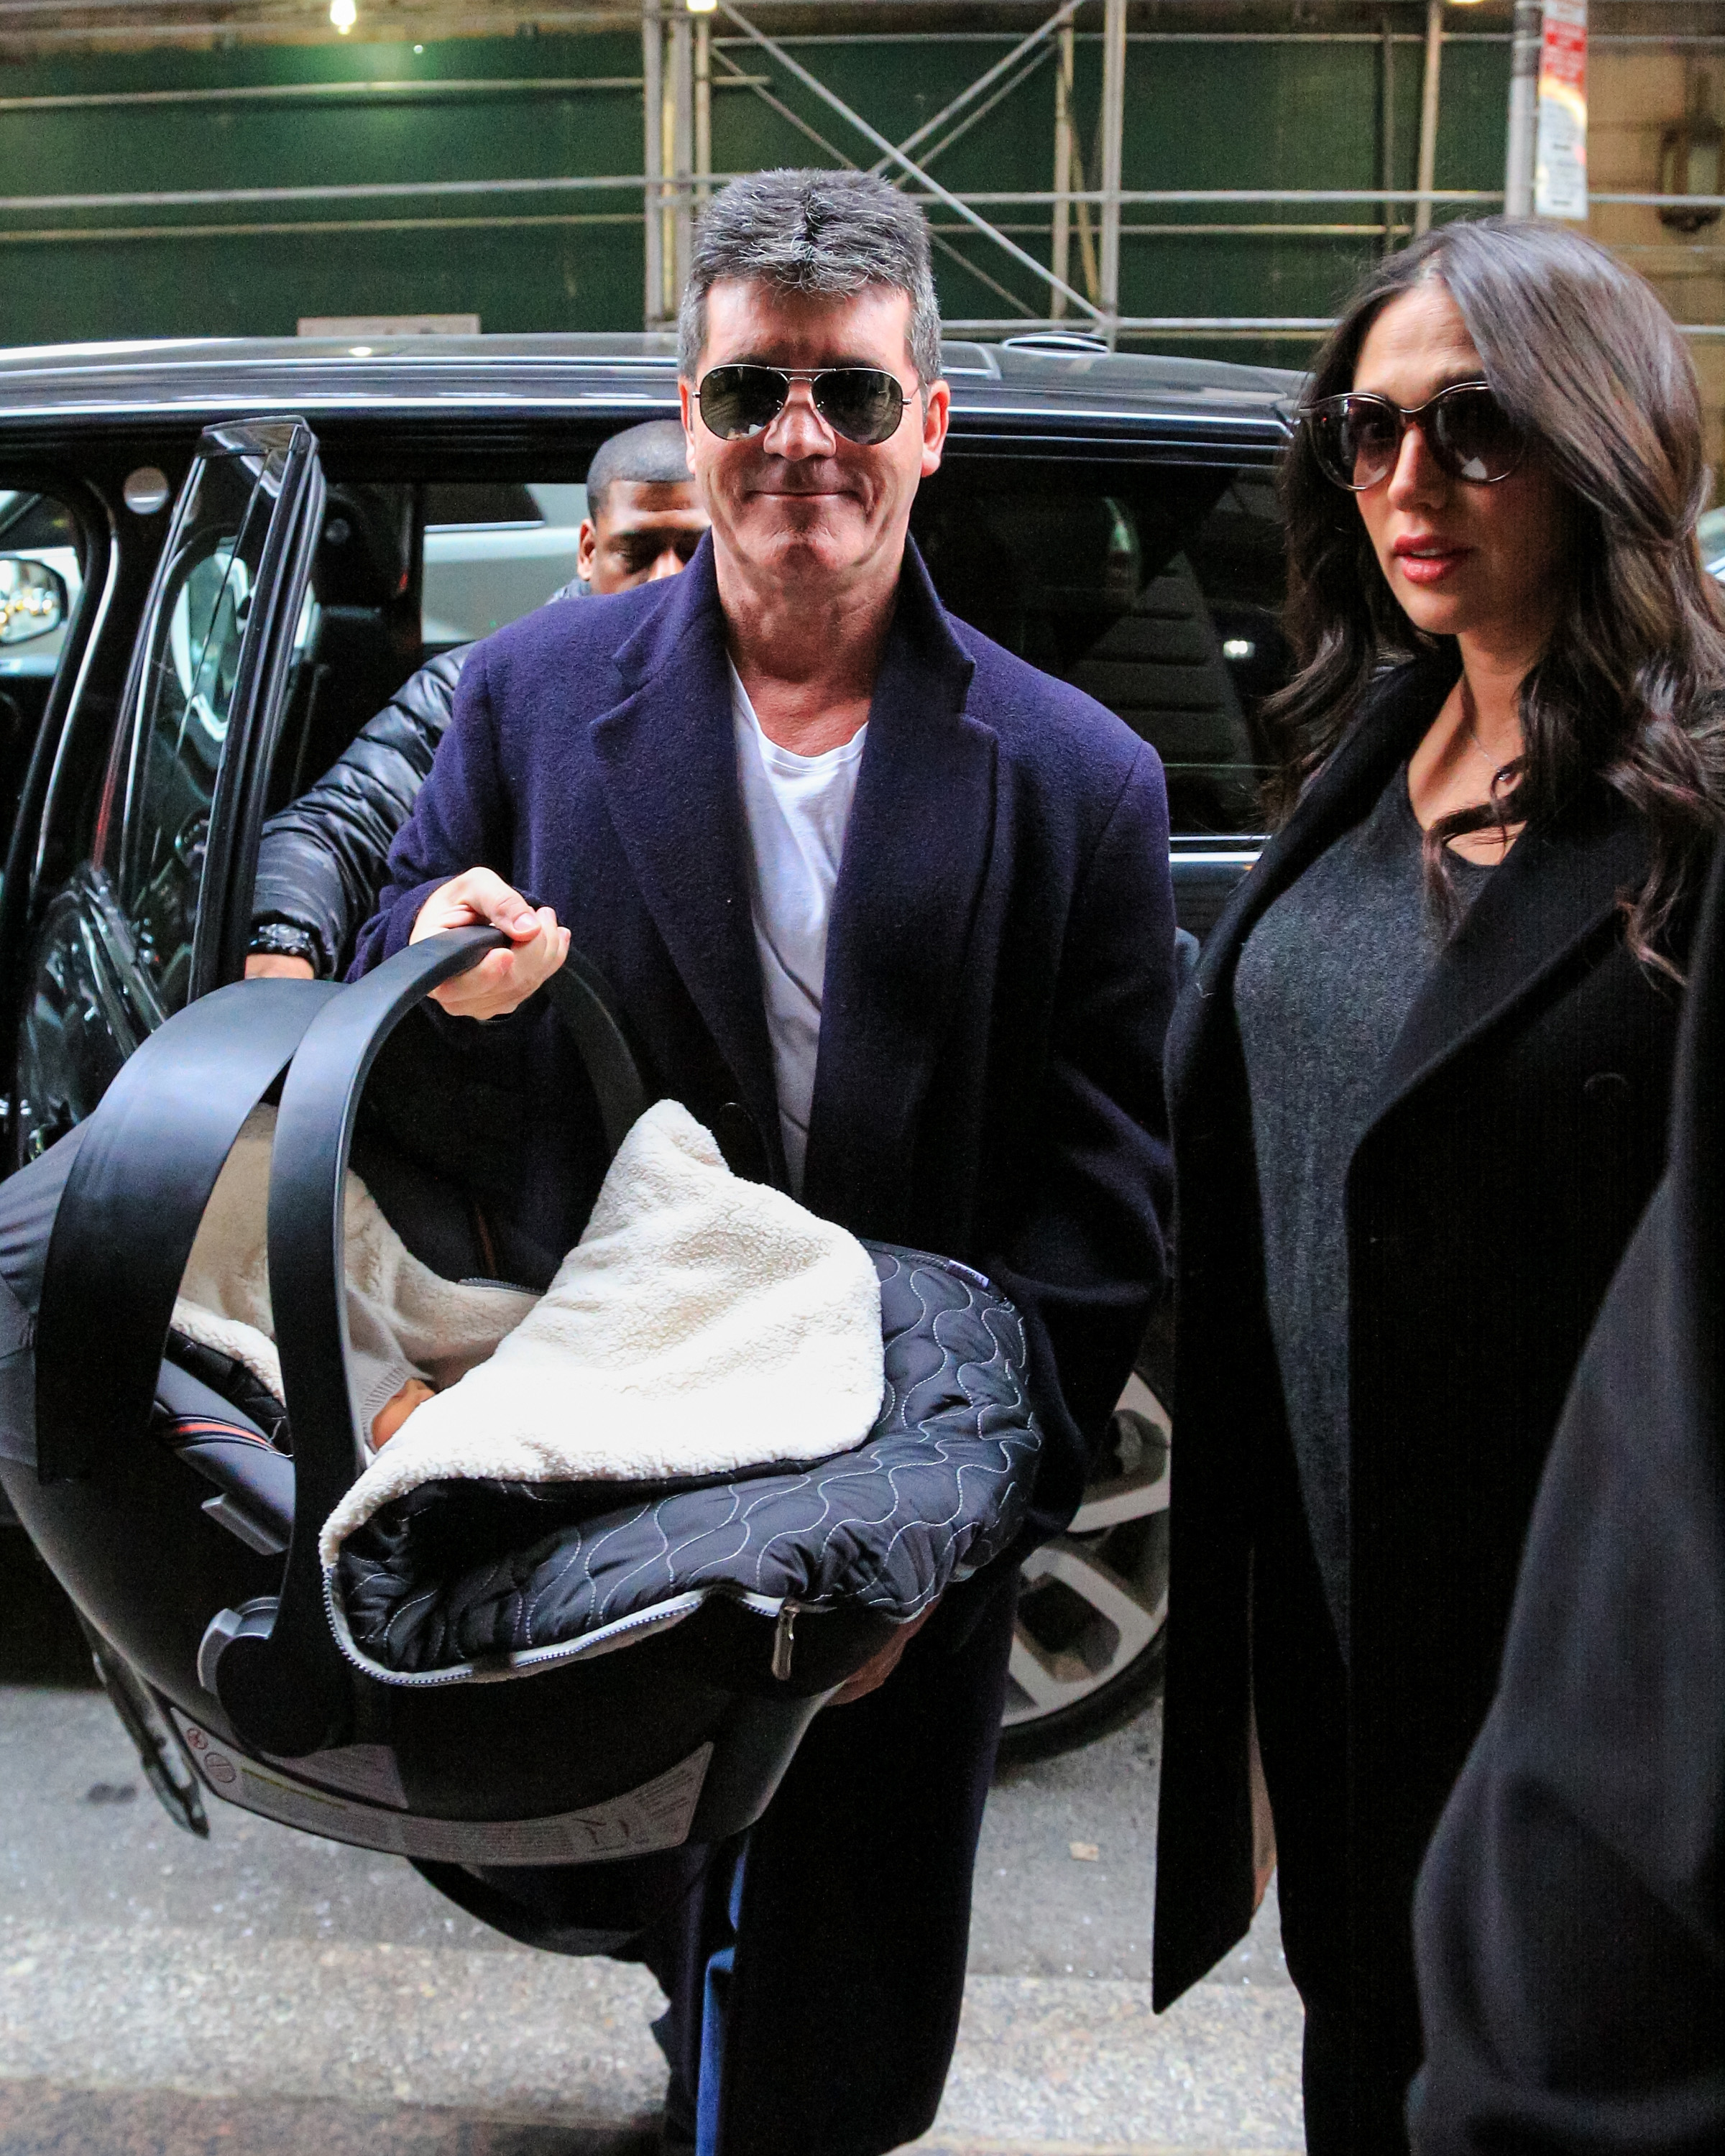 Simon Cowell and Lauren Silverman with their newborn son Eric Cowell seen arriving at their hotel on February 16, 2014, in New York City | Source: Getty Images